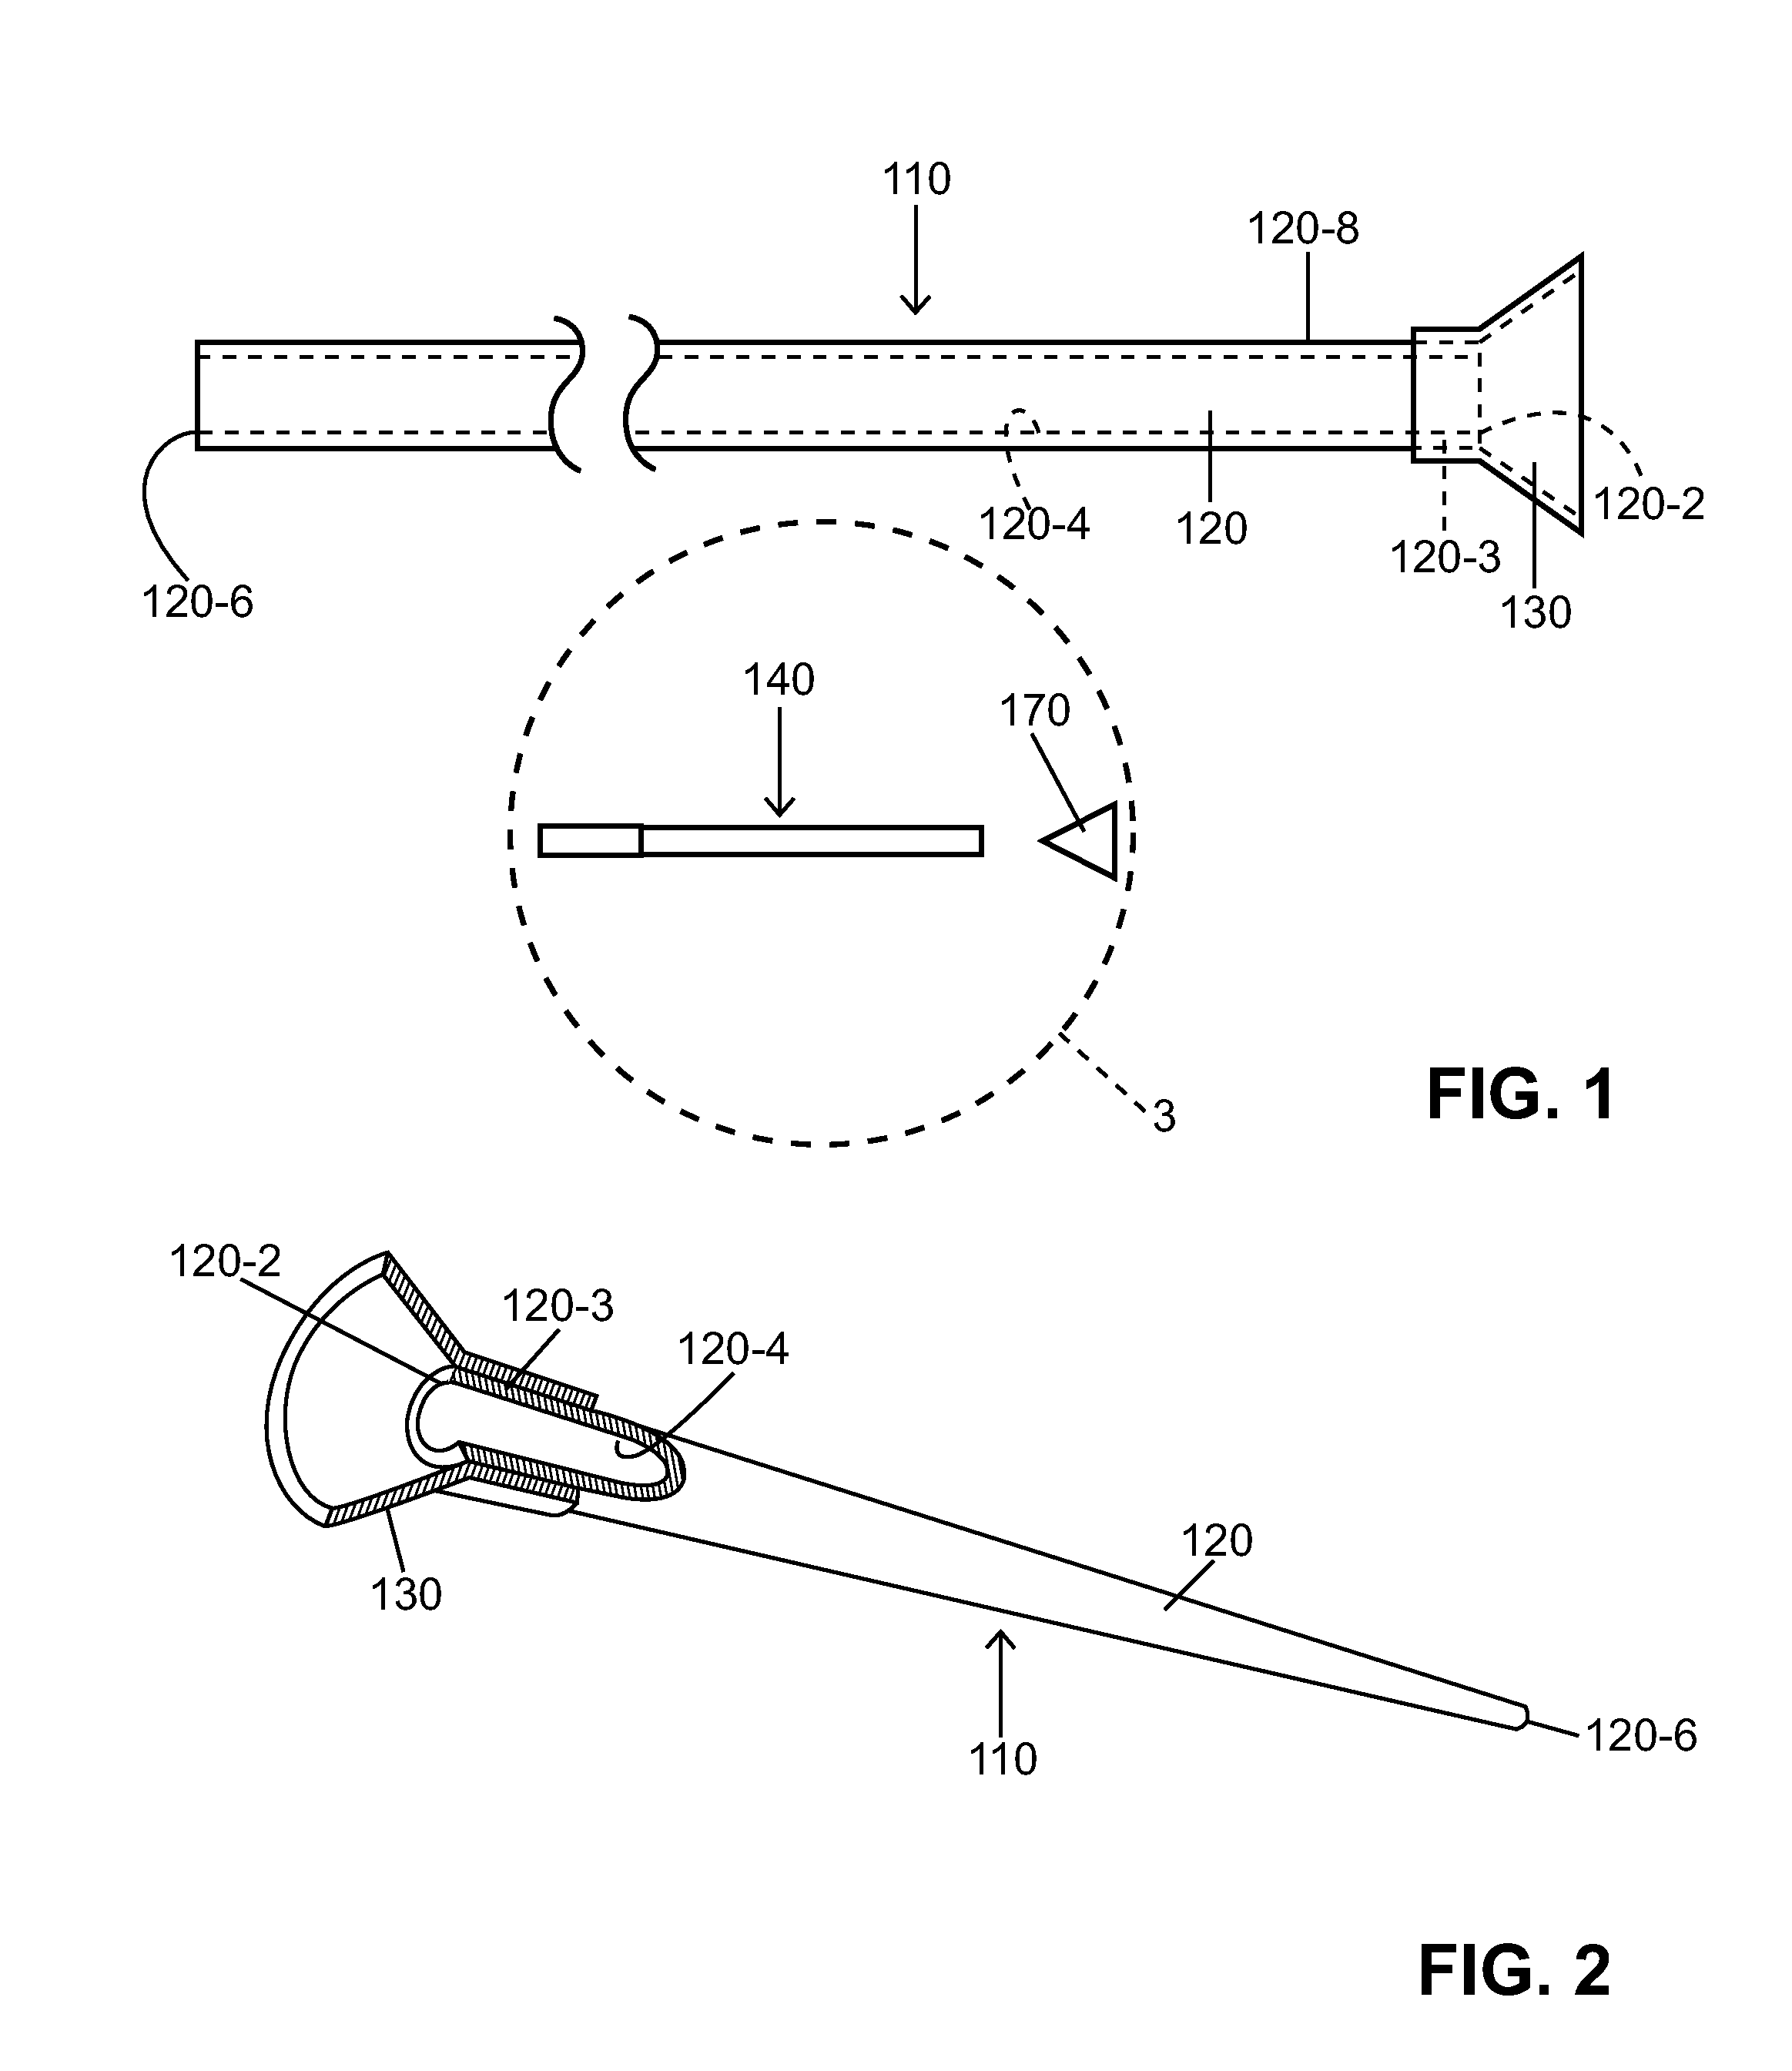 Apparatus for launching subcaliber projectiles at propellant operating pressures including the range of pressures that may be supplied by human breath